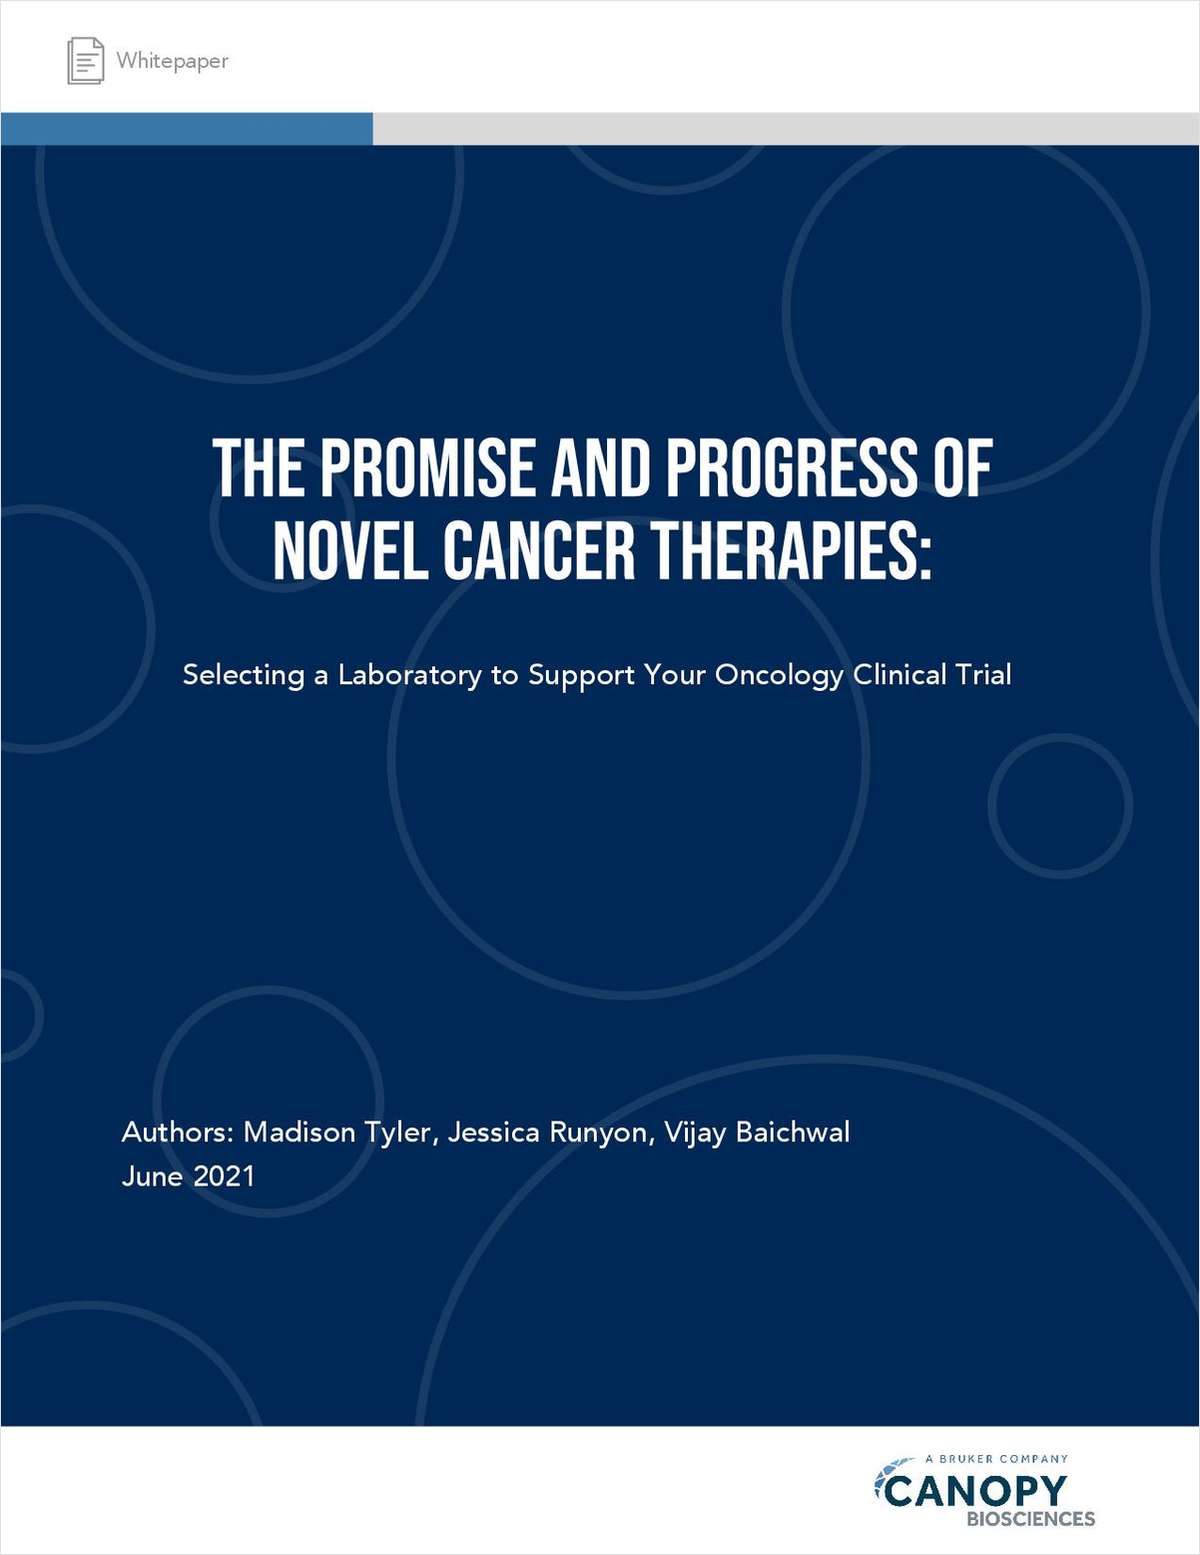 The Promise and Progress of Novel Cancer Therapies: Selecting a Laboratory to Support Your Oncology Clinical Trial